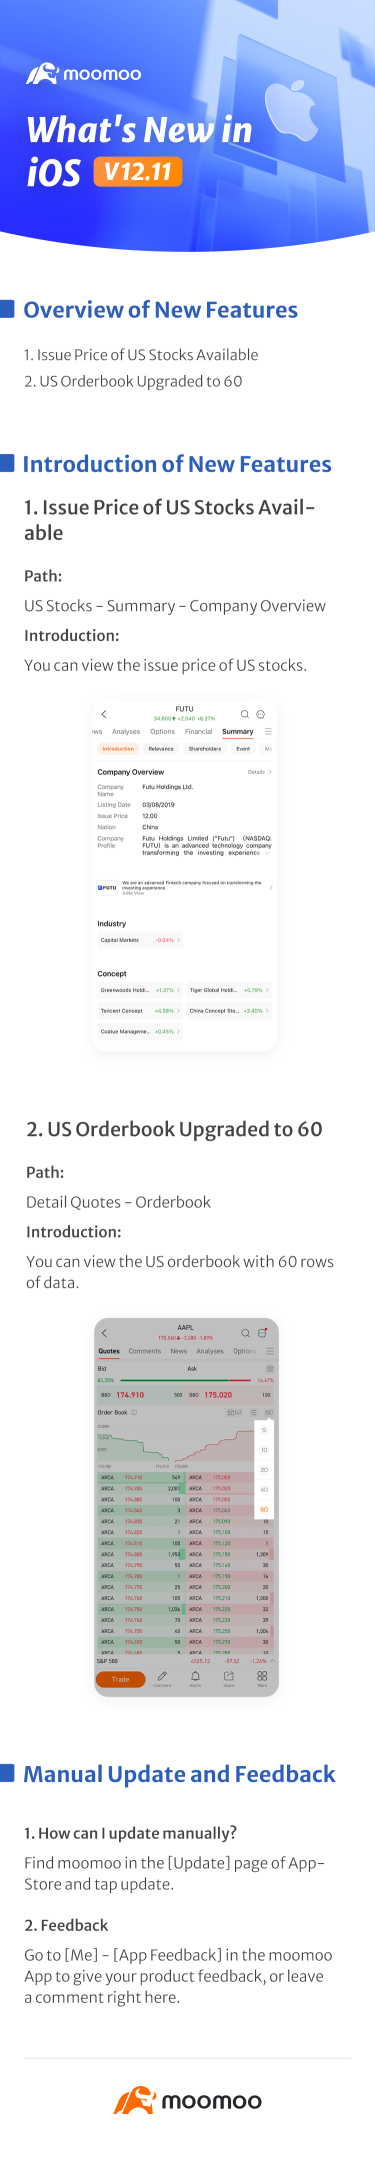 What's New: US Orderbook Upgraded in iOS v12.11